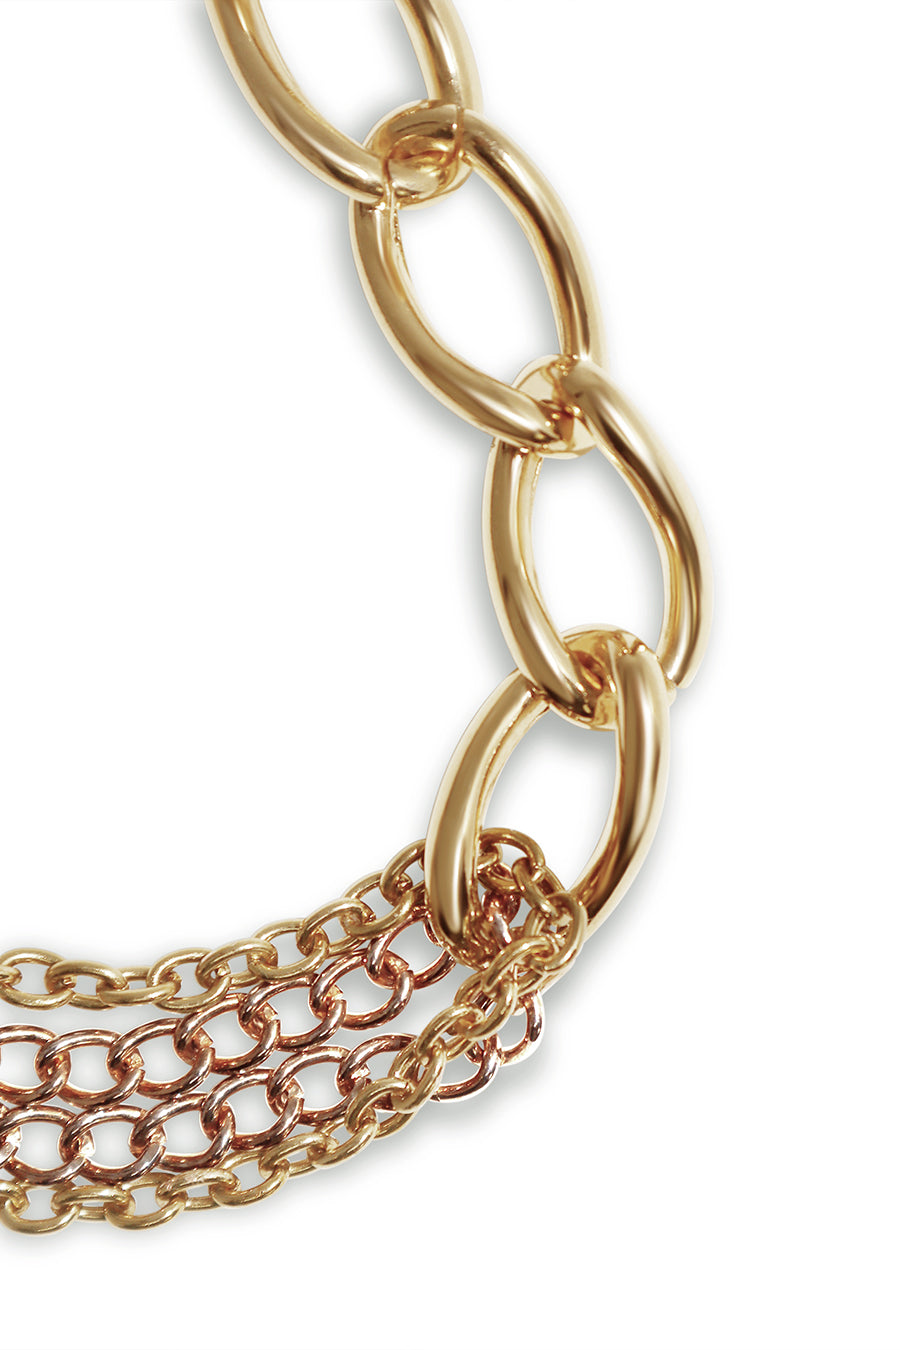 IK Plated Gold Chain - Men close view